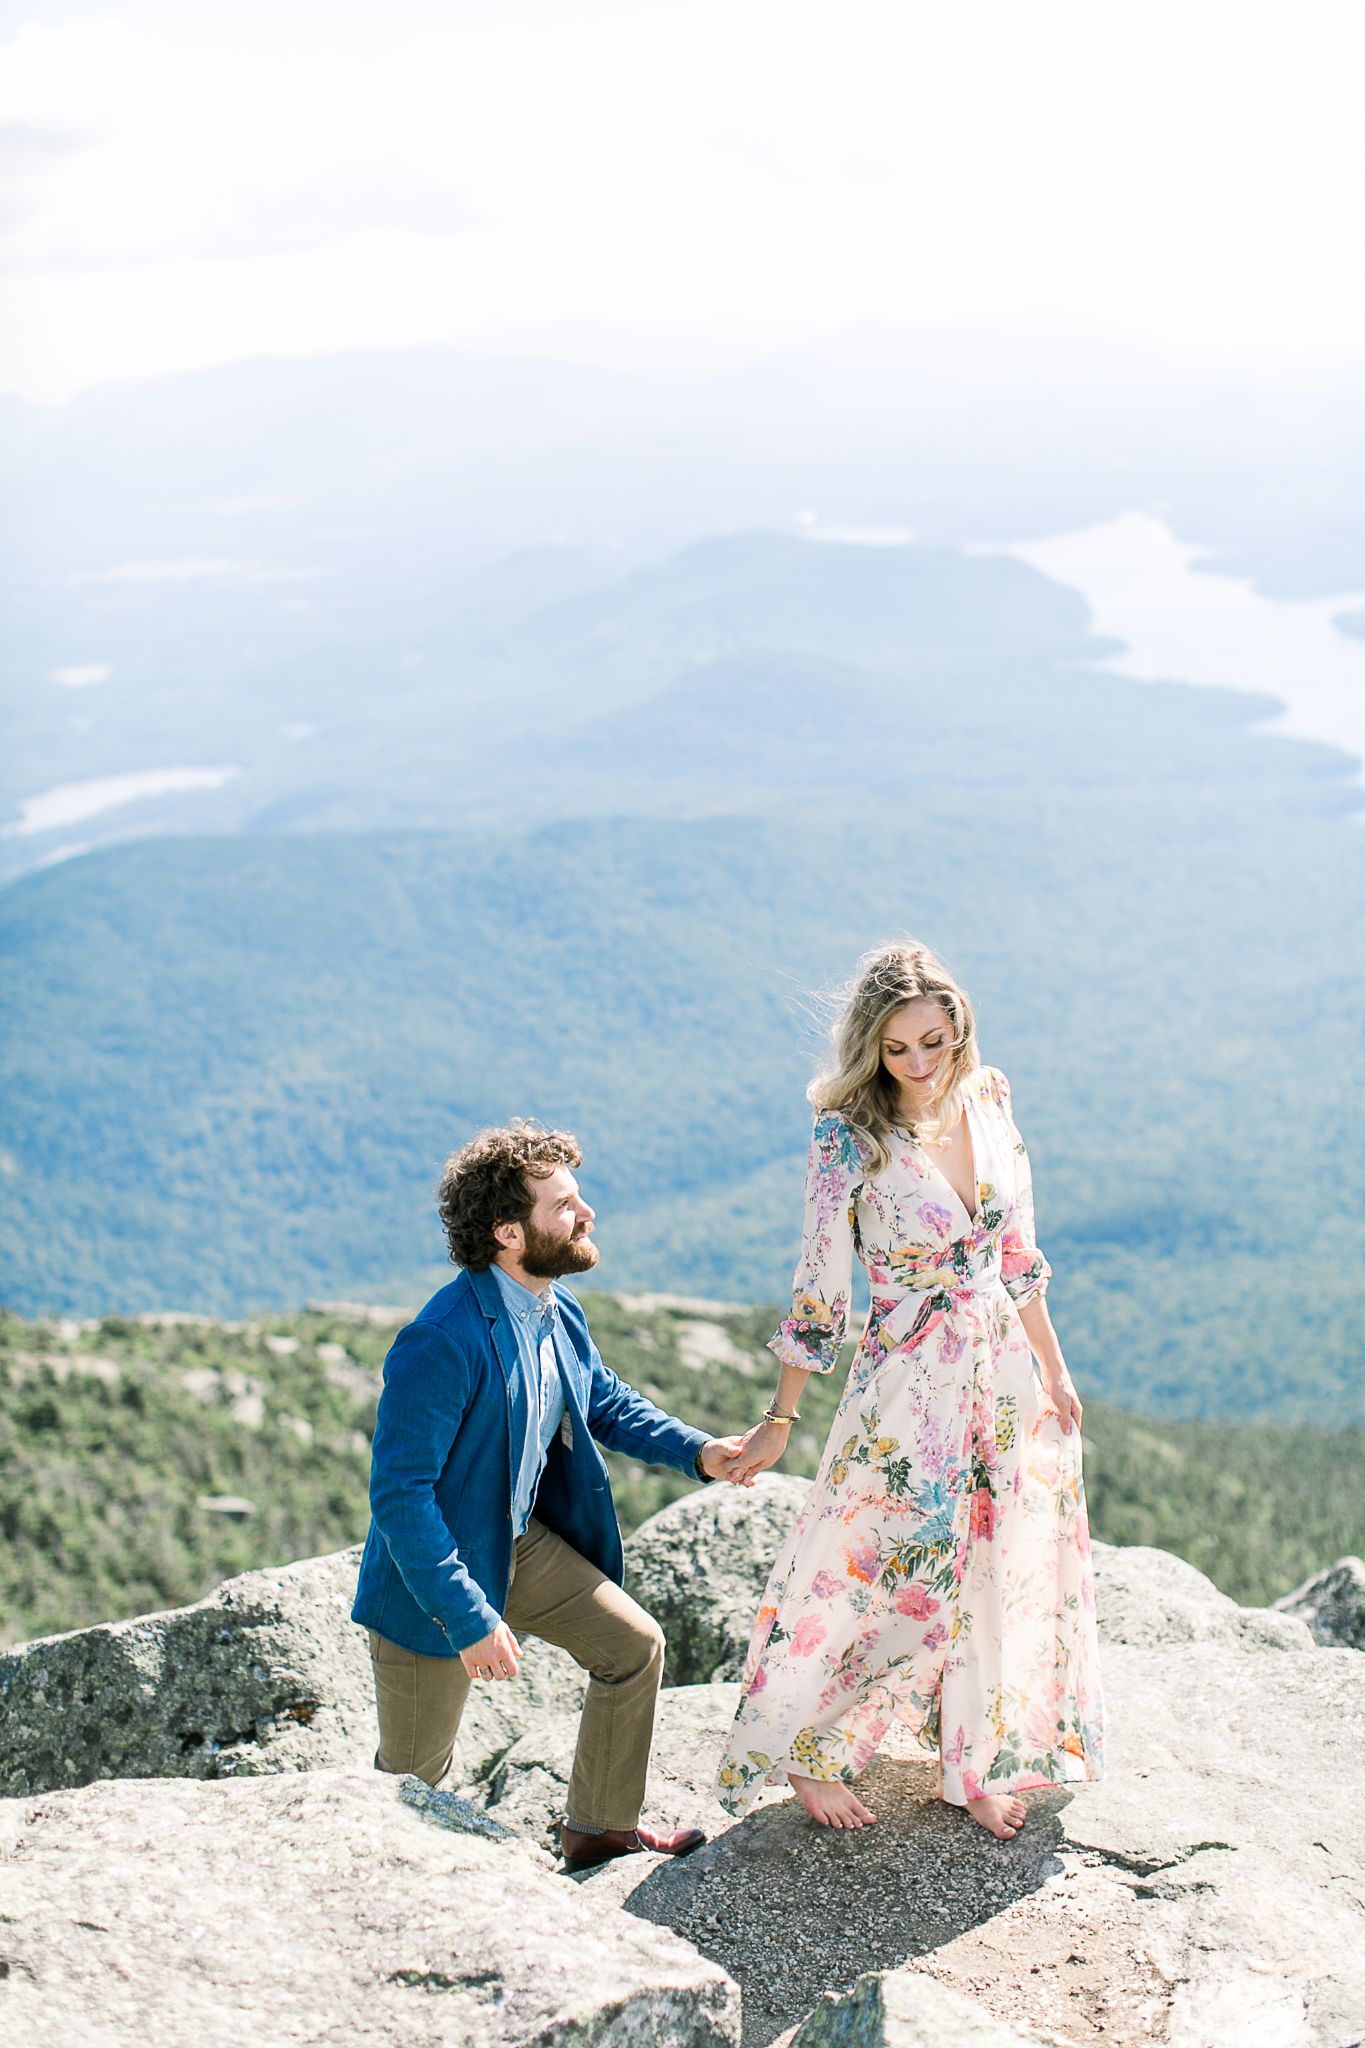 Adirondack wedding photography with scenic views of Whiteface Mountain